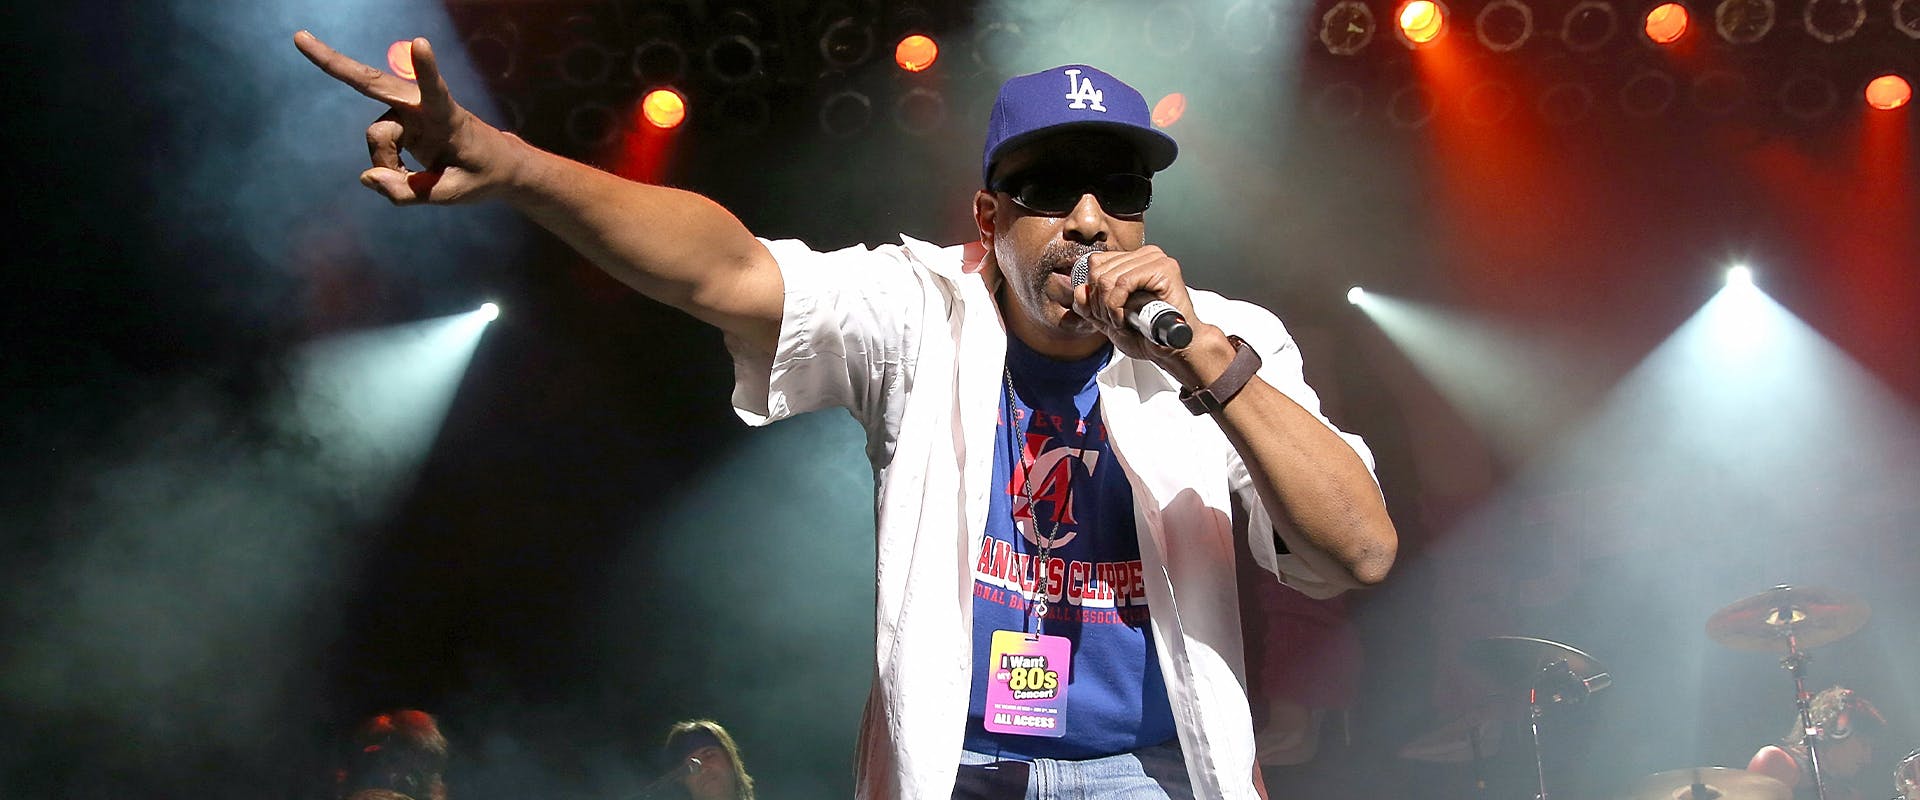 Tone Loc performs at "I Want My 80's" Concert The Theater at Madison Square Garden on November 6, 2015 in New York City. (Photo by Paul Zimmerman/WireImage)